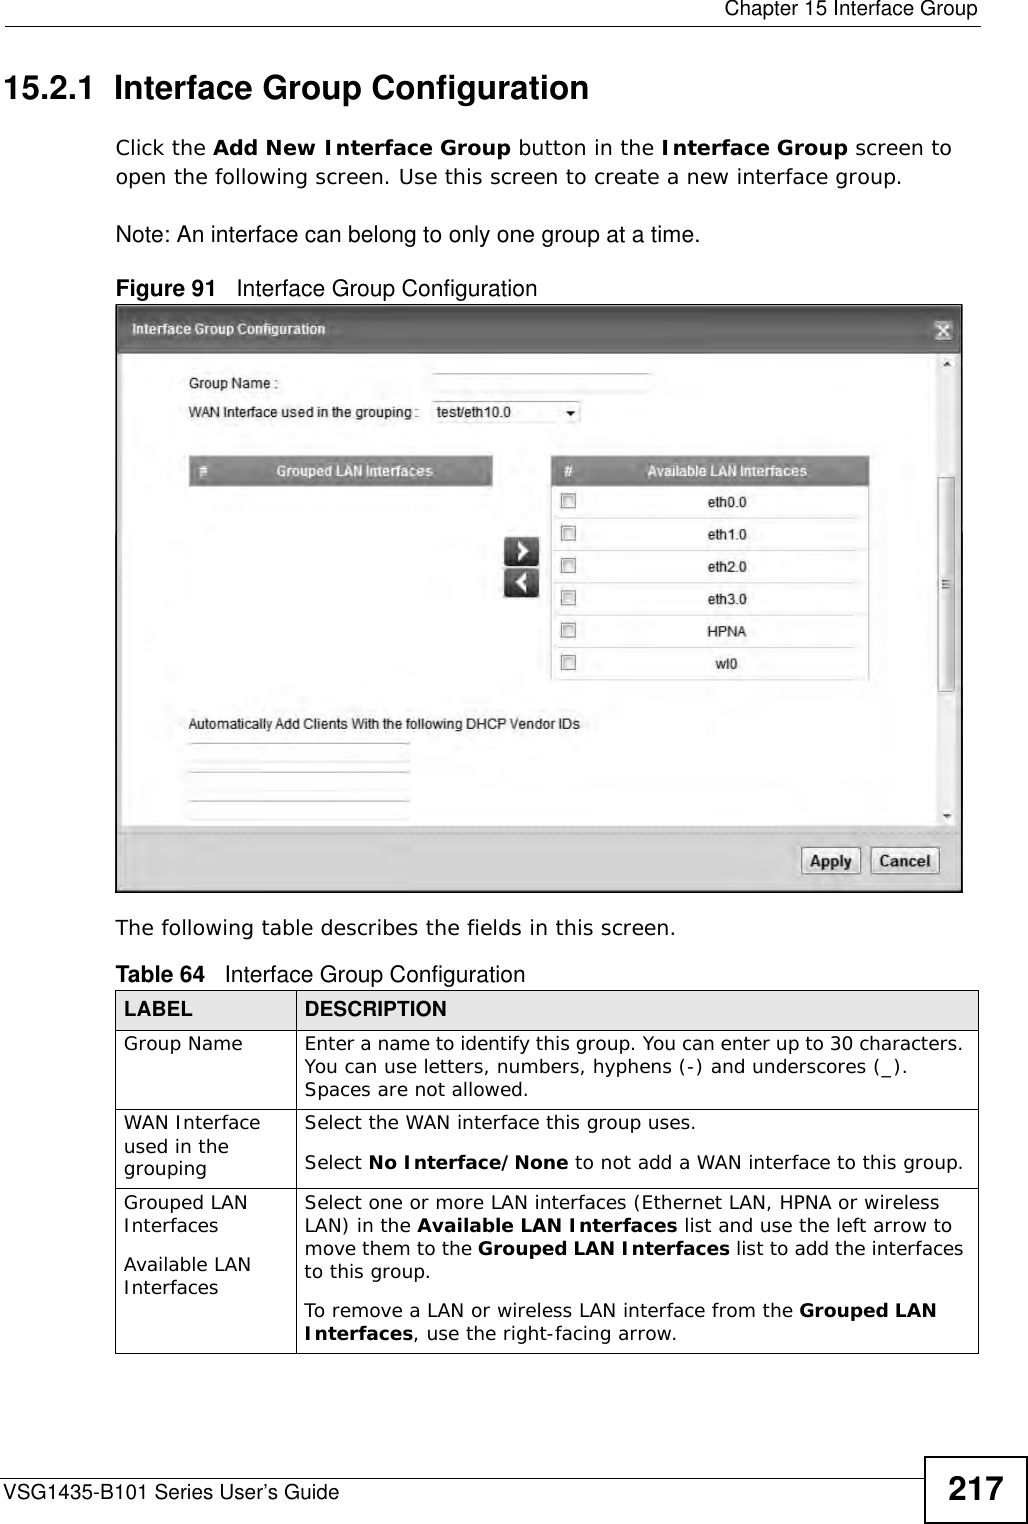  Chapter 15 Interface GroupVSG1435-B101 Series User’s Guide 21715.2.1  Interface Group ConfigurationClick the Add New Interface Group button in the Interface Group screen to open the following screen. Use this screen to create a new interface group. Note: An interface can belong to only one group at a time.Figure 91   Interface Group Configuration The following table describes the fields in this screen. Table 64   Interface Group ConfigurationLABEL DESCRIPTIONGroup Name Enter a name to identify this group. You can enter up to 30 characters. You can use letters, numbers, hyphens (-) and underscores (_). Spaces are not allowed.WAN Interface used in the groupingSelect the WAN interface this group uses.Select No Interface/None to not add a WAN interface to this group.Grouped LAN InterfacesAvailable LAN InterfacesSelect one or more LAN interfaces (Ethernet LAN, HPNA or wireless LAN) in the Available LAN Interfaces list and use the left arrow to move them to the Grouped LAN Interfaces list to add the interfaces to this group.To remove a LAN or wireless LAN interface from the Grouped LAN Interfaces, use the right-facing arrow.